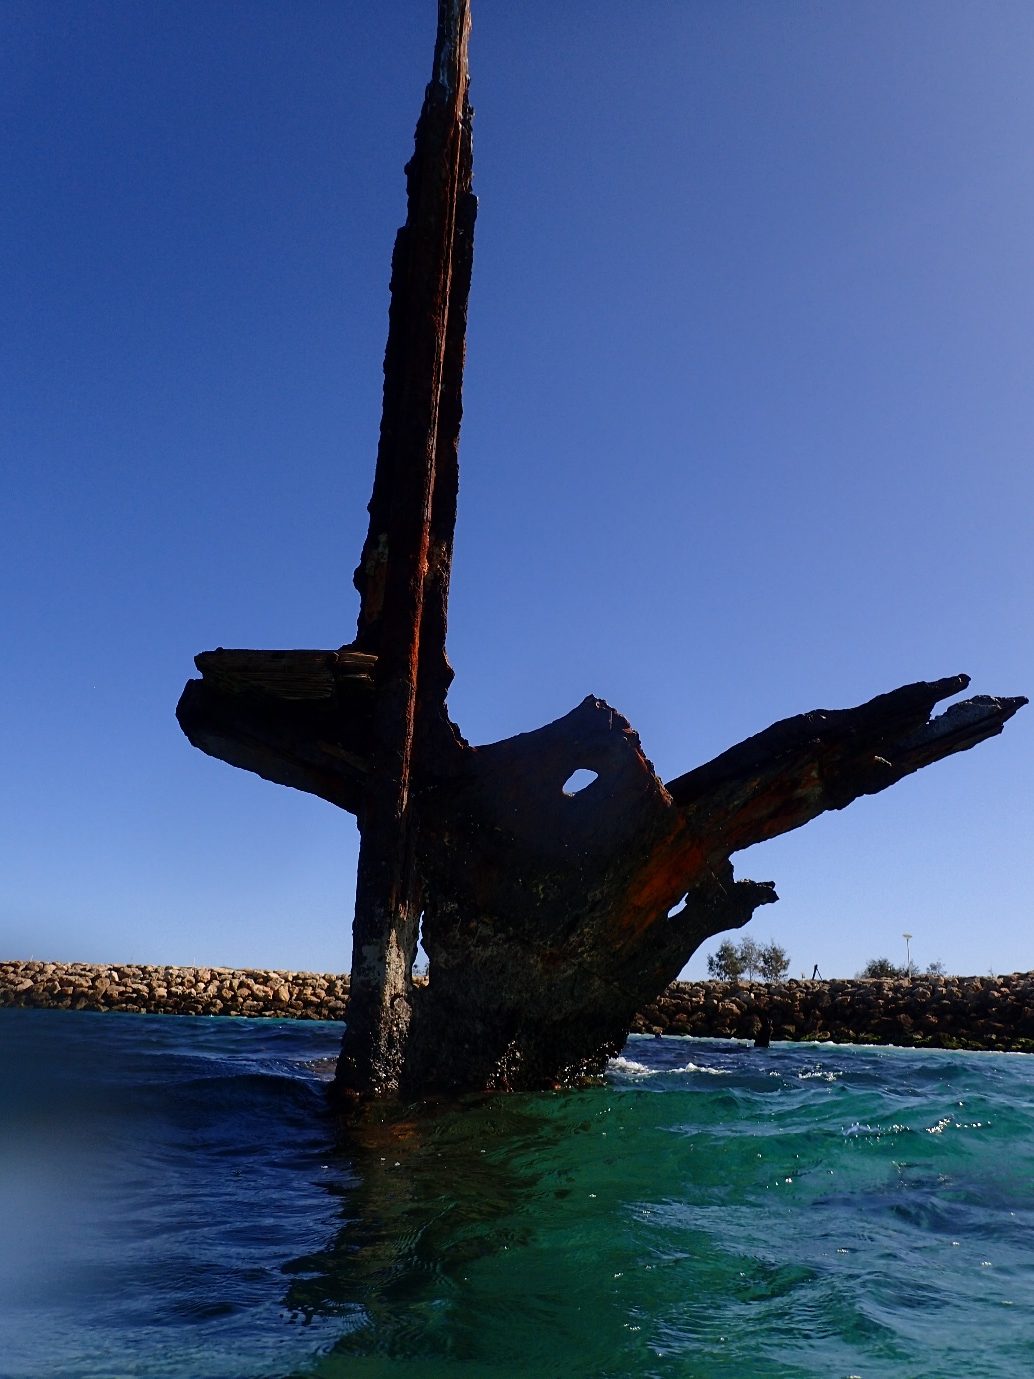 The remains of the bow of the Omeo jutting above the water.